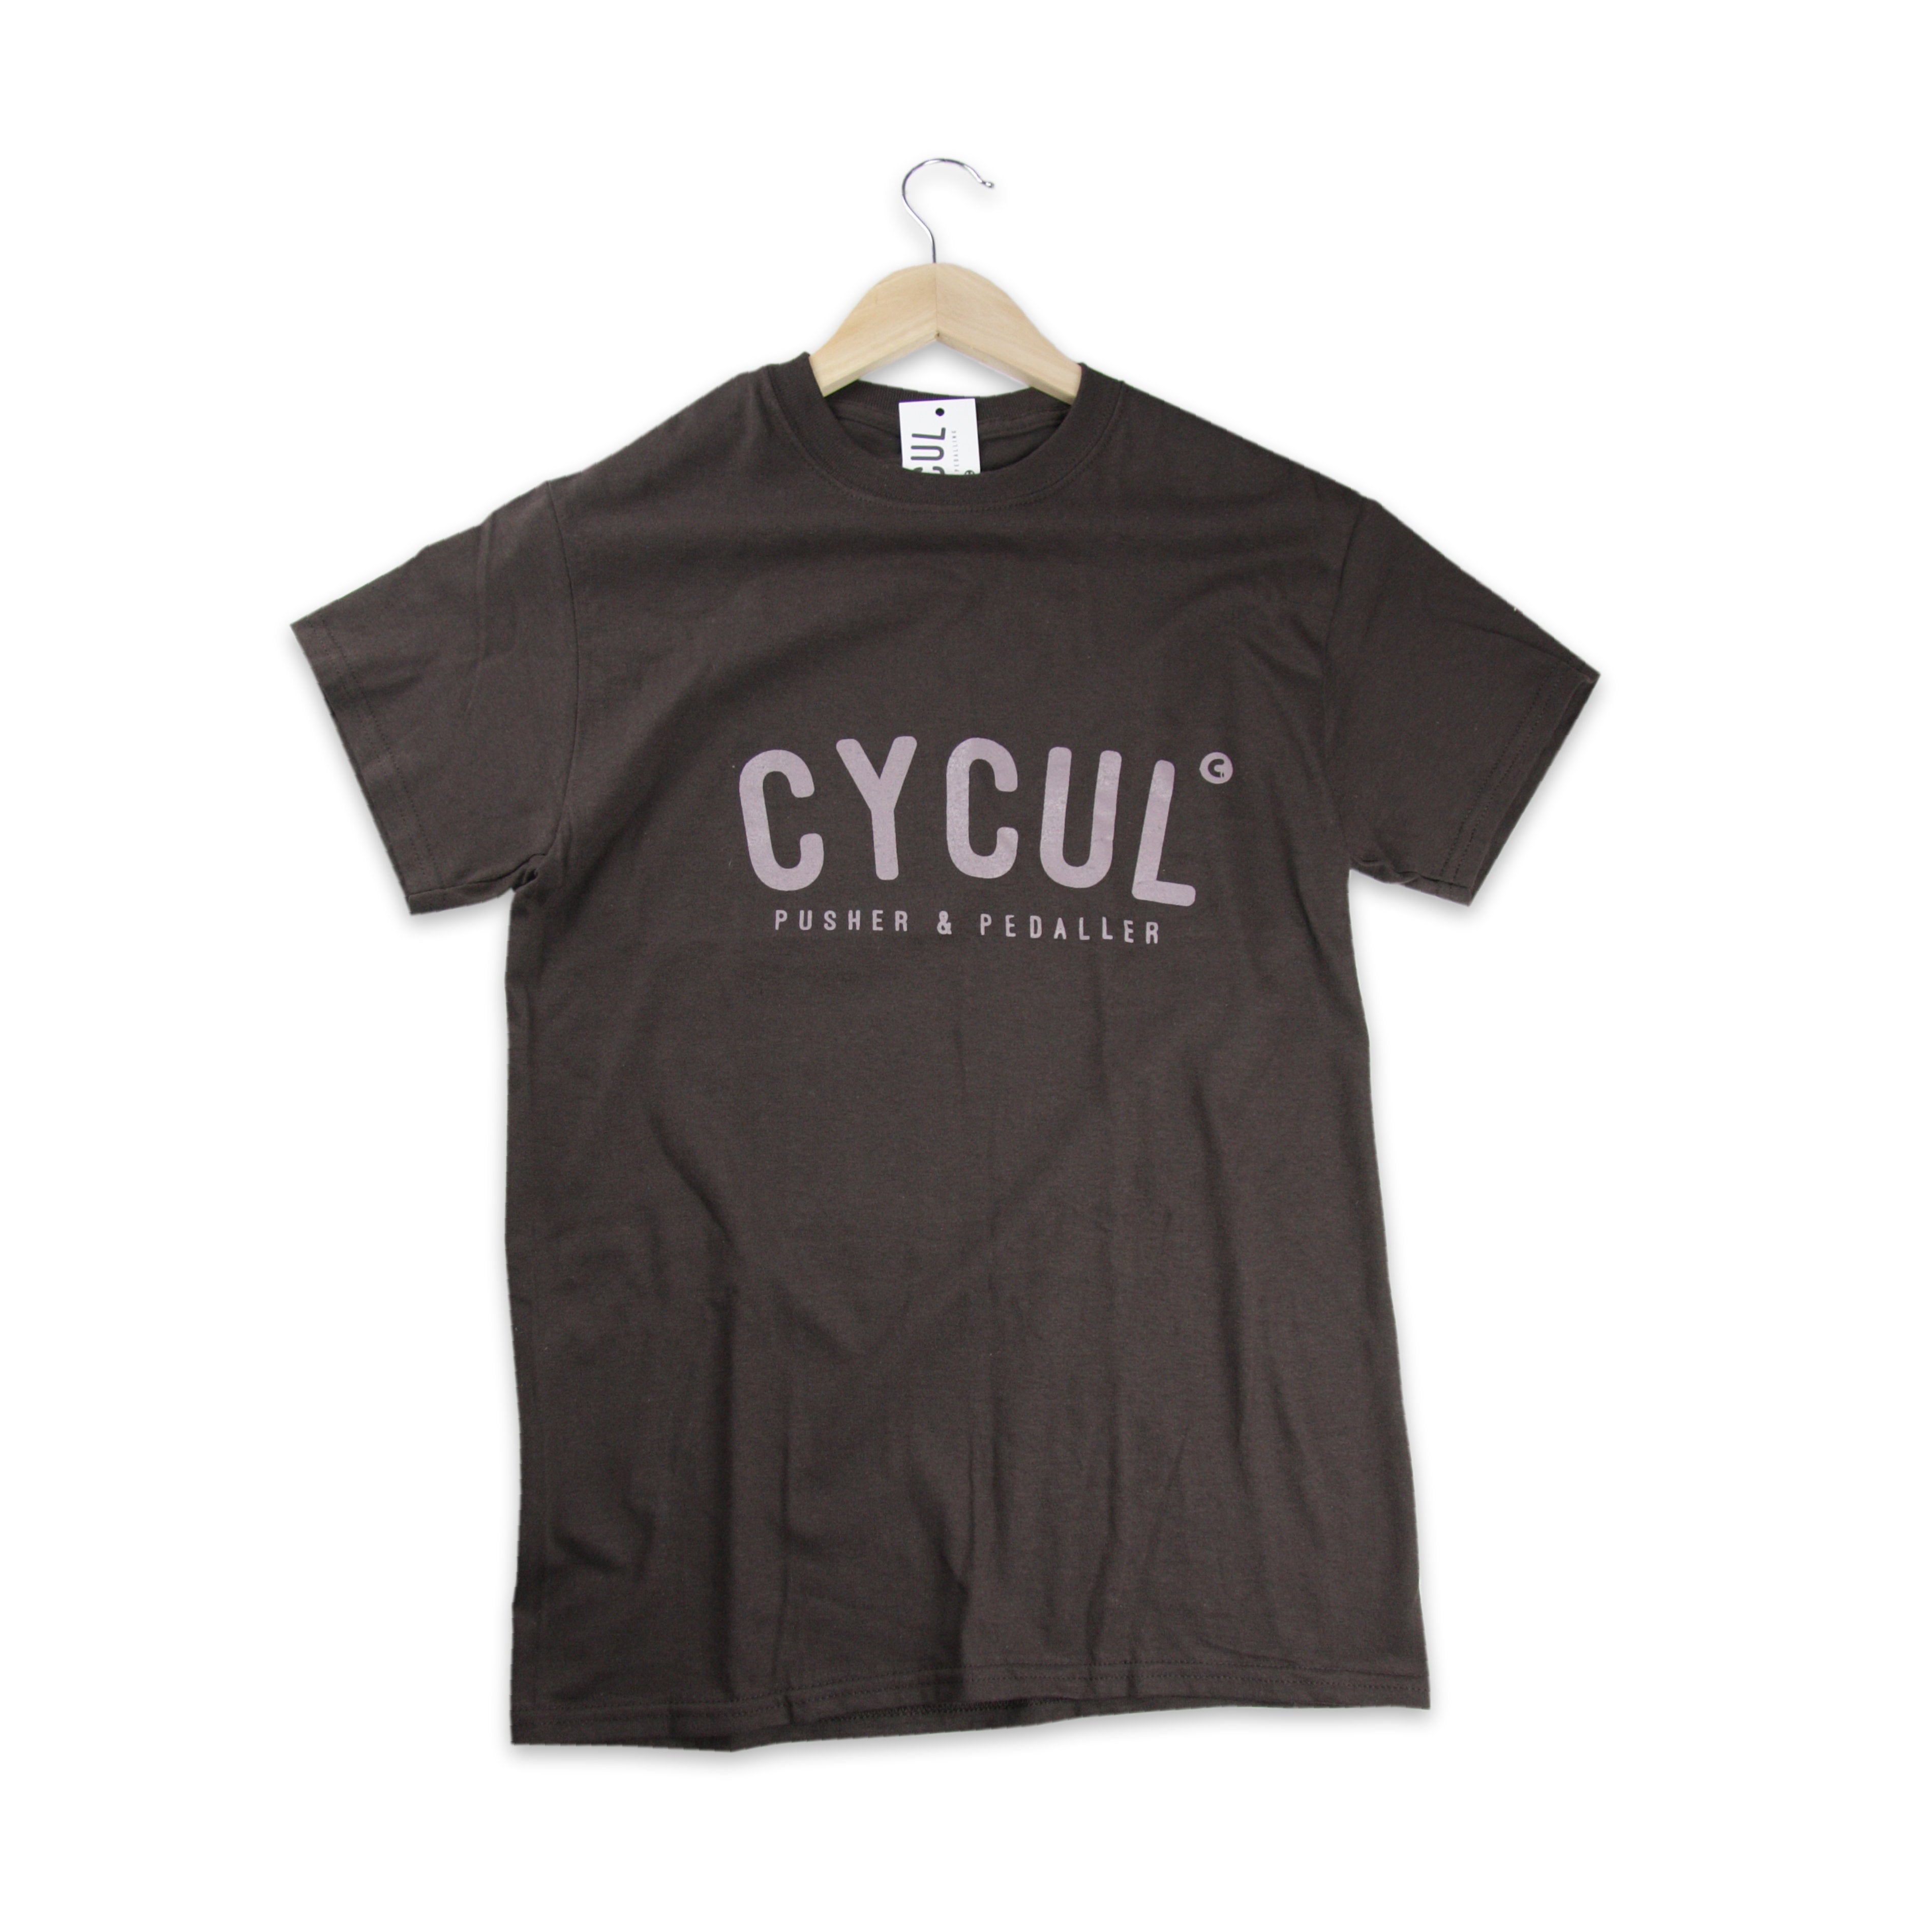 Cycul: Pusher & Pedaller